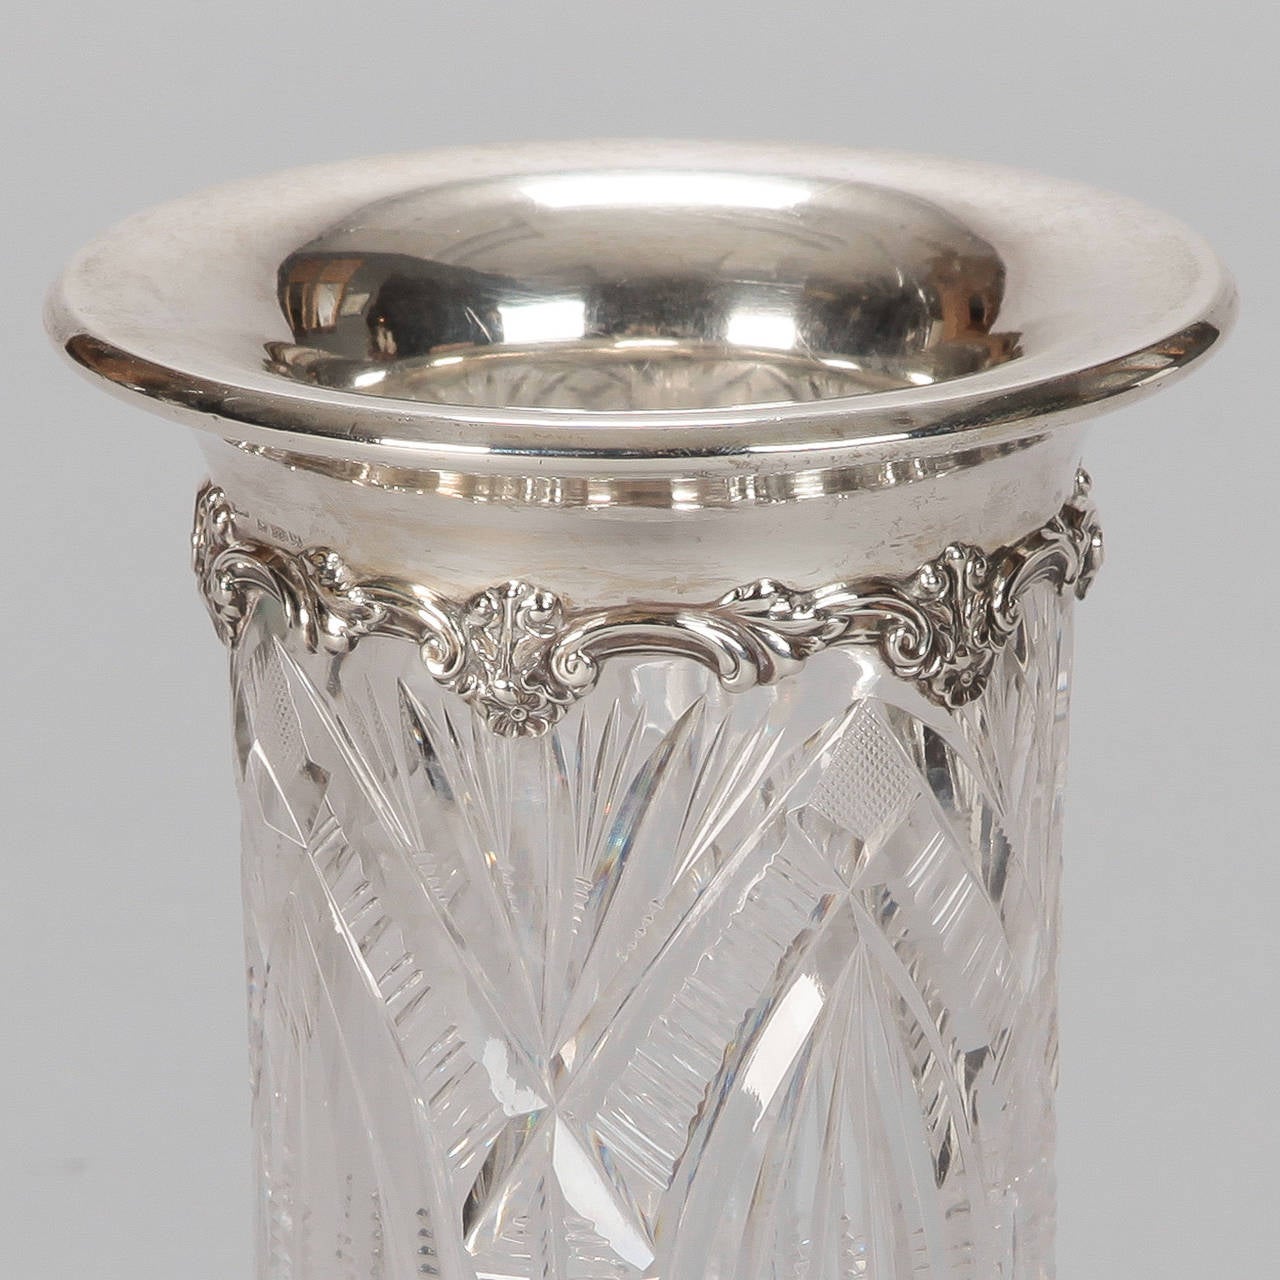 Early 20th Century Heavy Carved Crystal Vase with Sterling Silver Rim